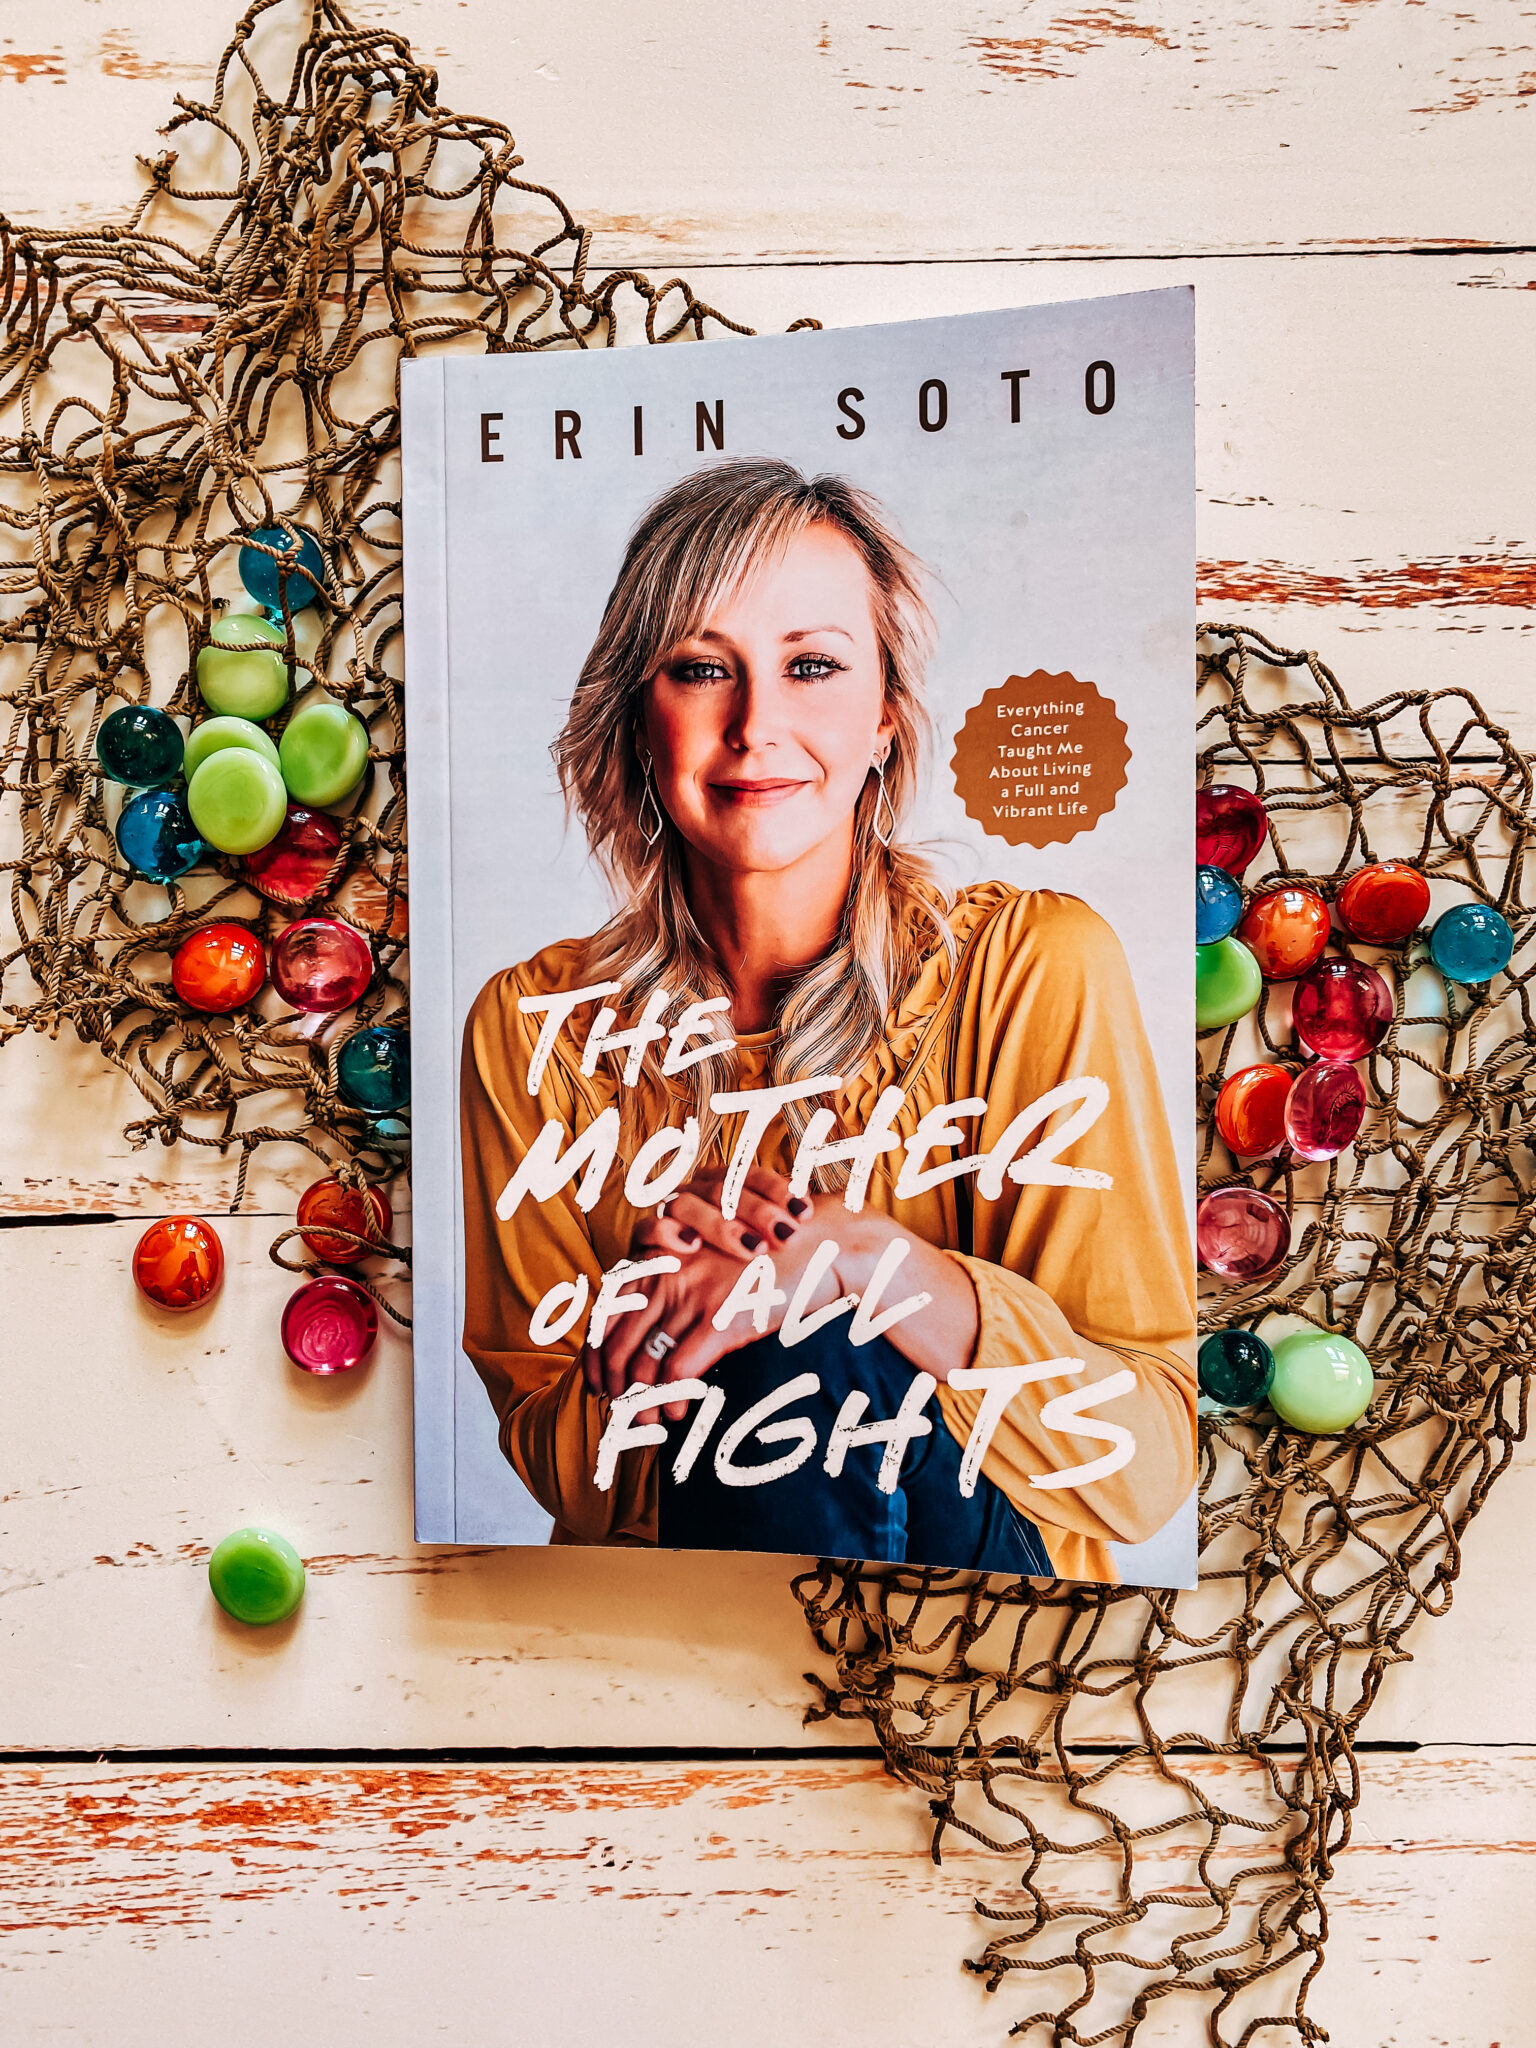 The Mother of All Fights by Erin Soto